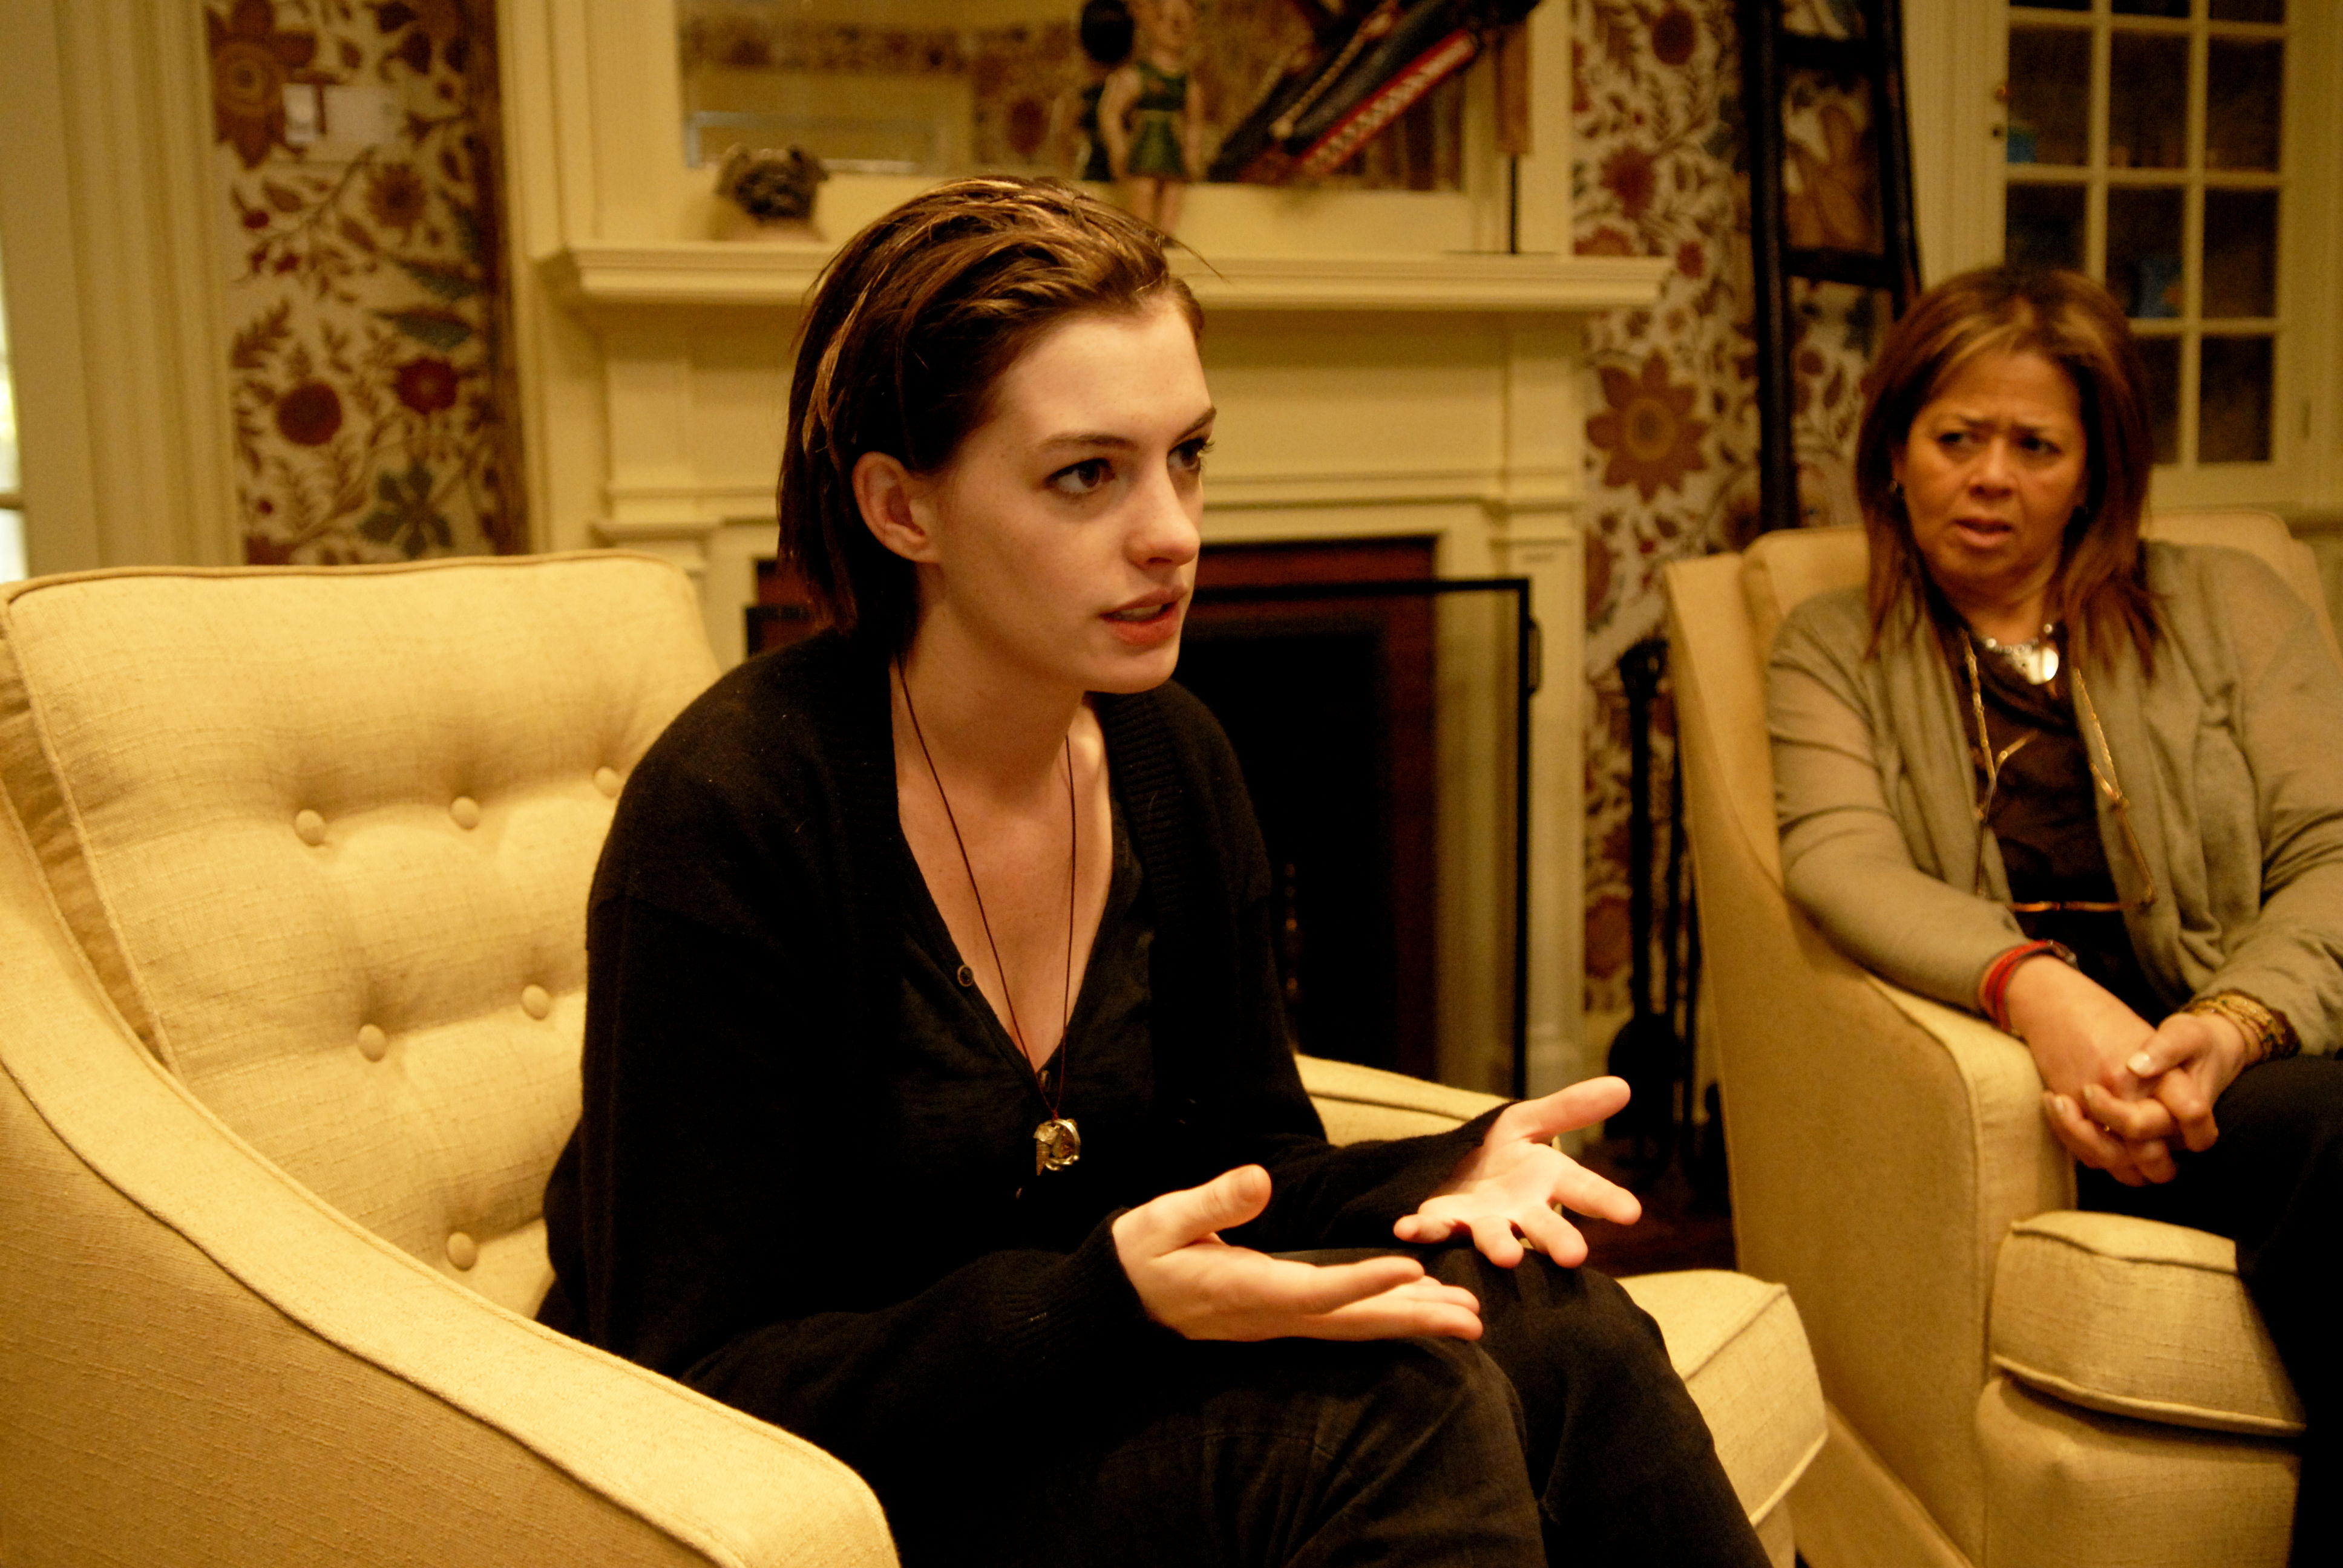 Anne Hathaway as Kym and Anna Deavere Smith as Carol in Sony Pictures Classics' Rachel Getting Married (2008). Photo by Bob Vergara.